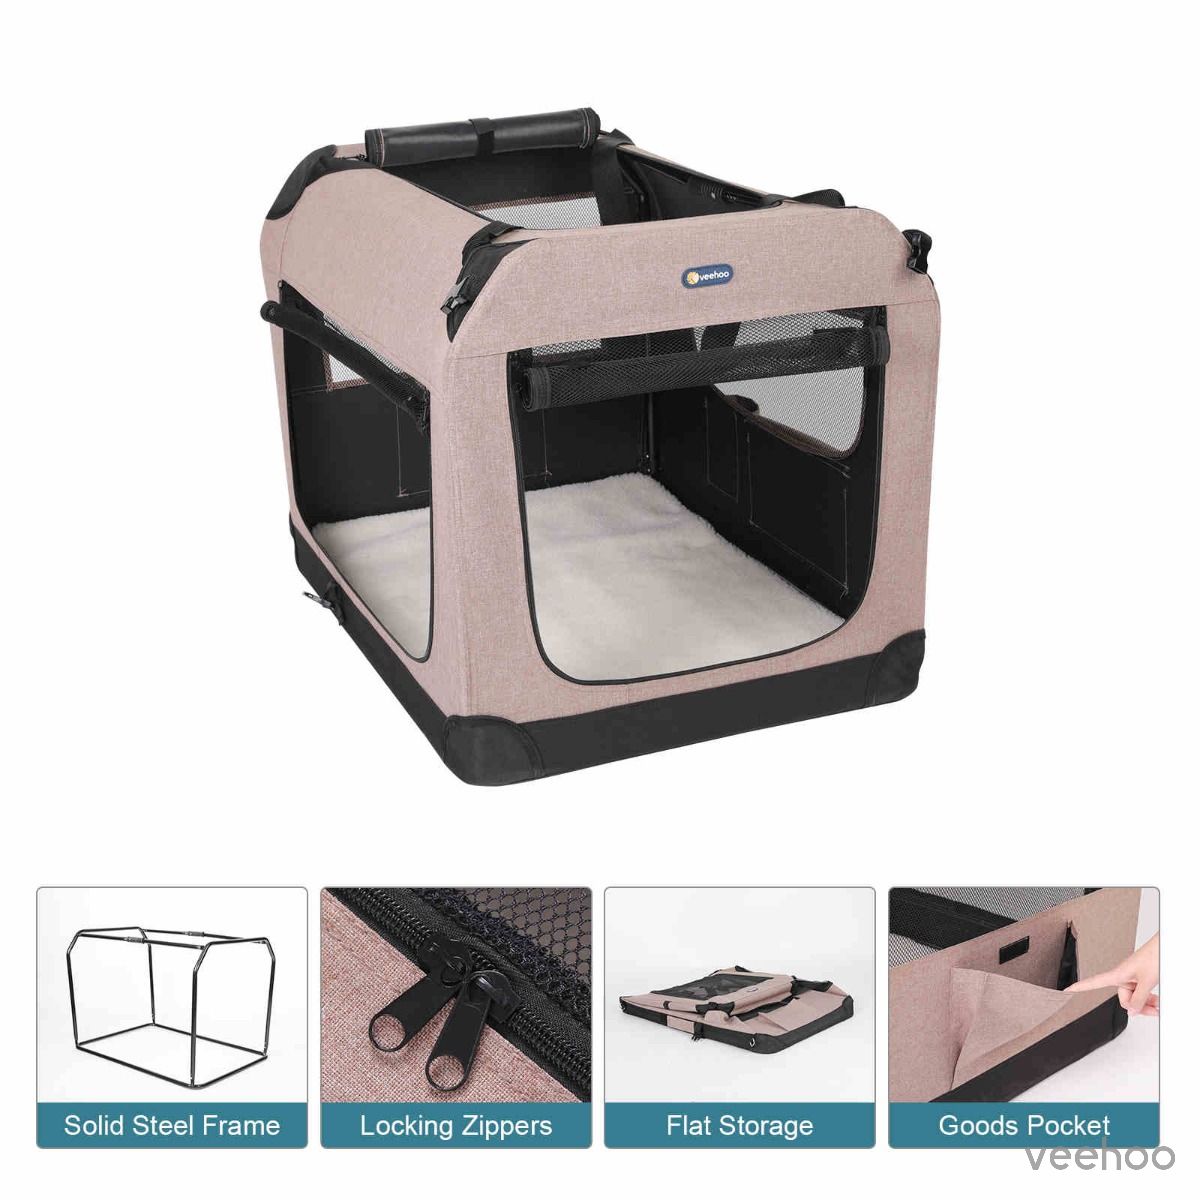 32 Inch Soft Sided Folding Crate Pet Carrier 